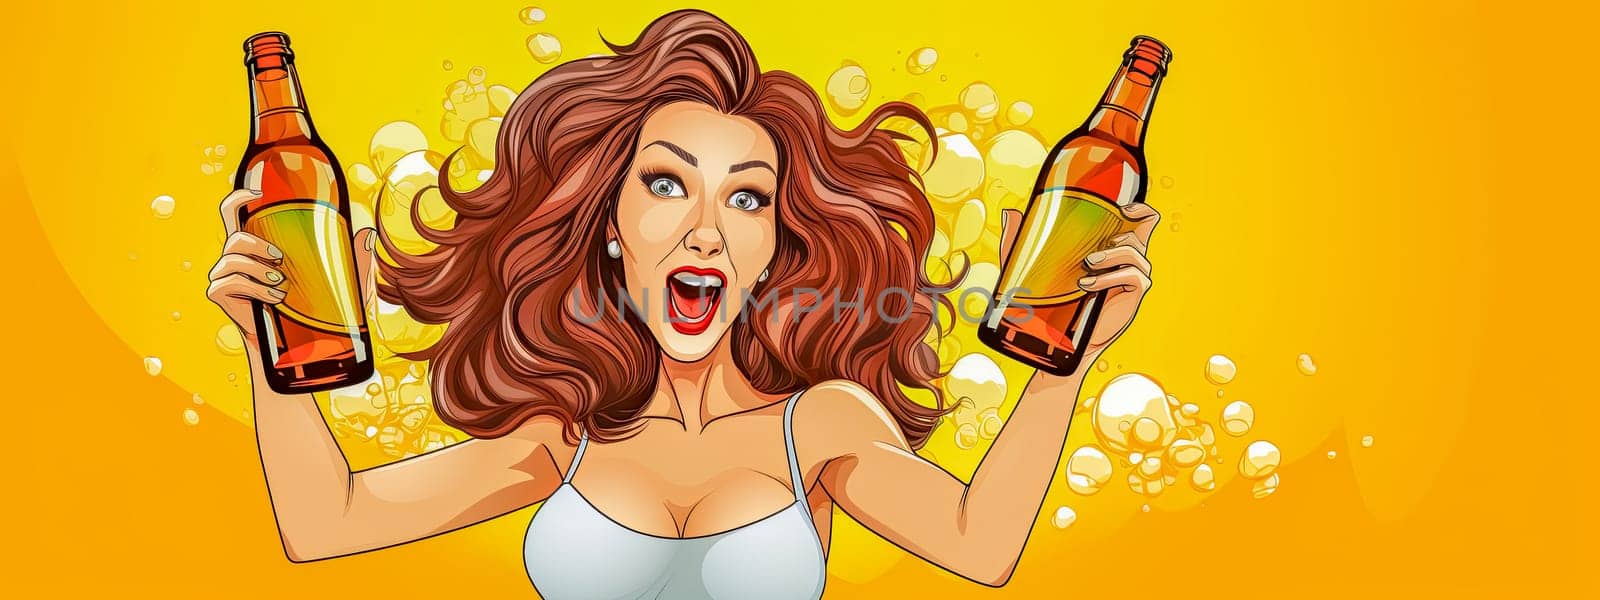 Excited Woman Celebrating with Beer Bottles by Edophoto